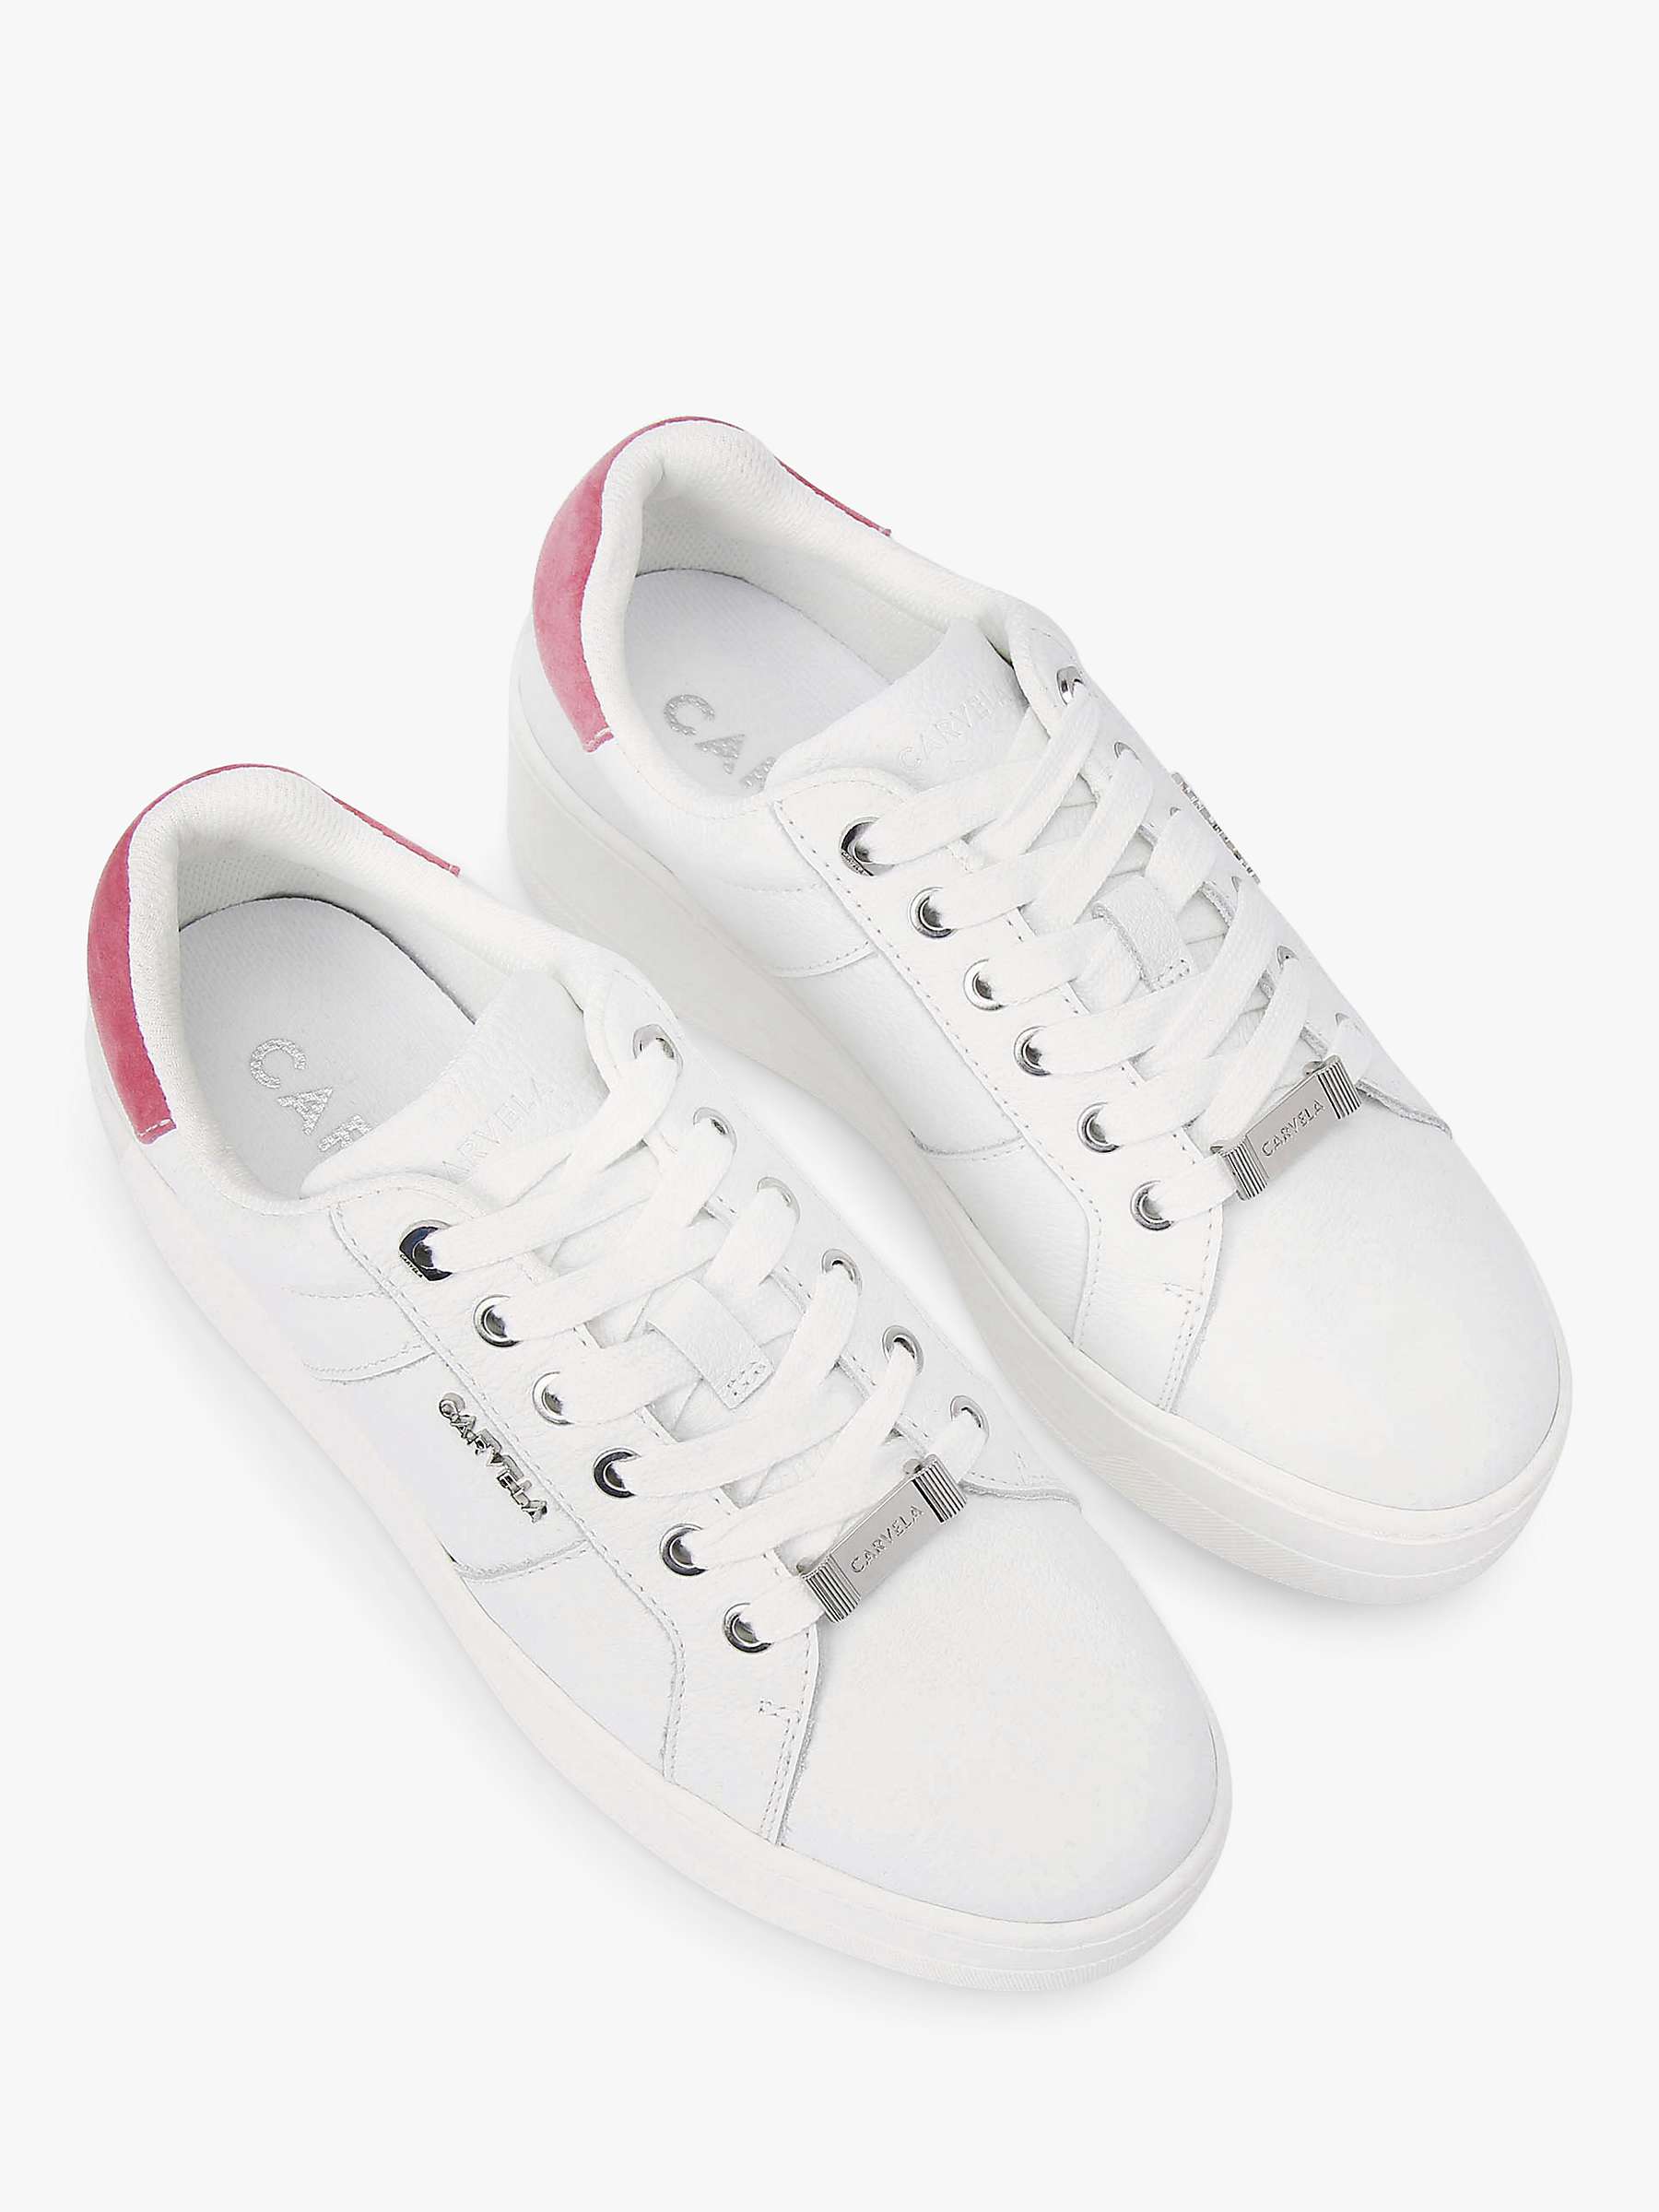 Carvela Connected Flatform Chunky Trainers, White/Pink at John Lewis ...